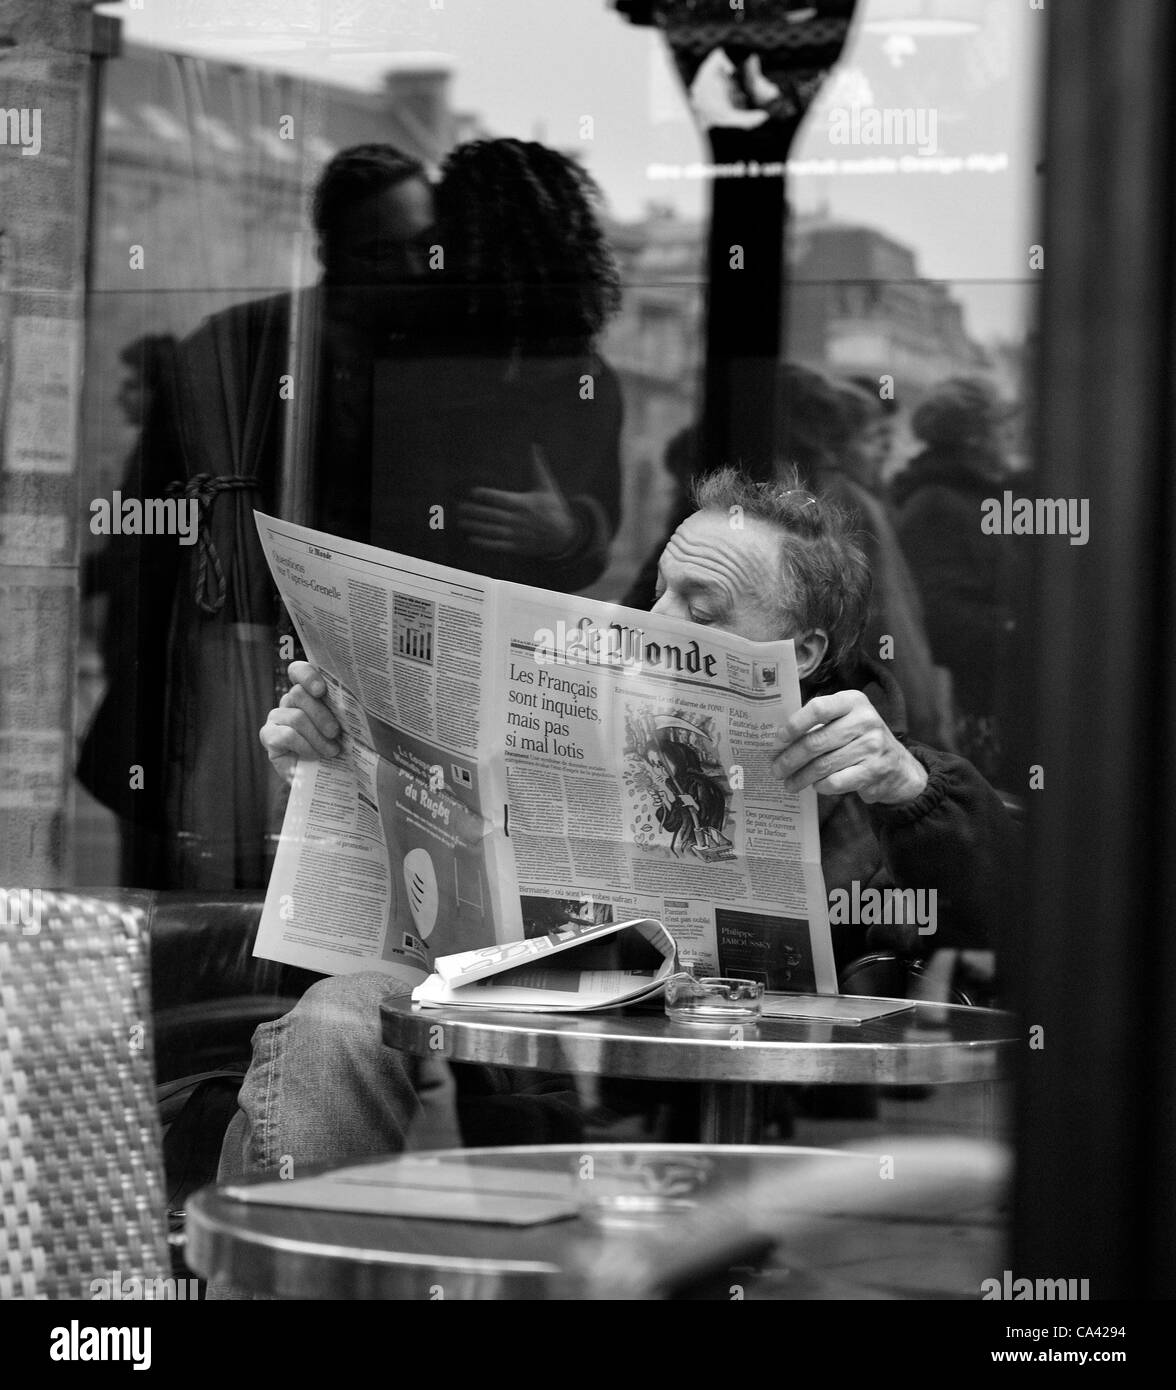 Nov 01, 2007 - Paris, France - Man in a cafe reads the newspaper Le Monde as a couple embracing is reflected in the glass, Saint Severin Cafe, Place St. Michel. (Credit Image: (c) Mark Avery/ZUMA Press) Stock Photo